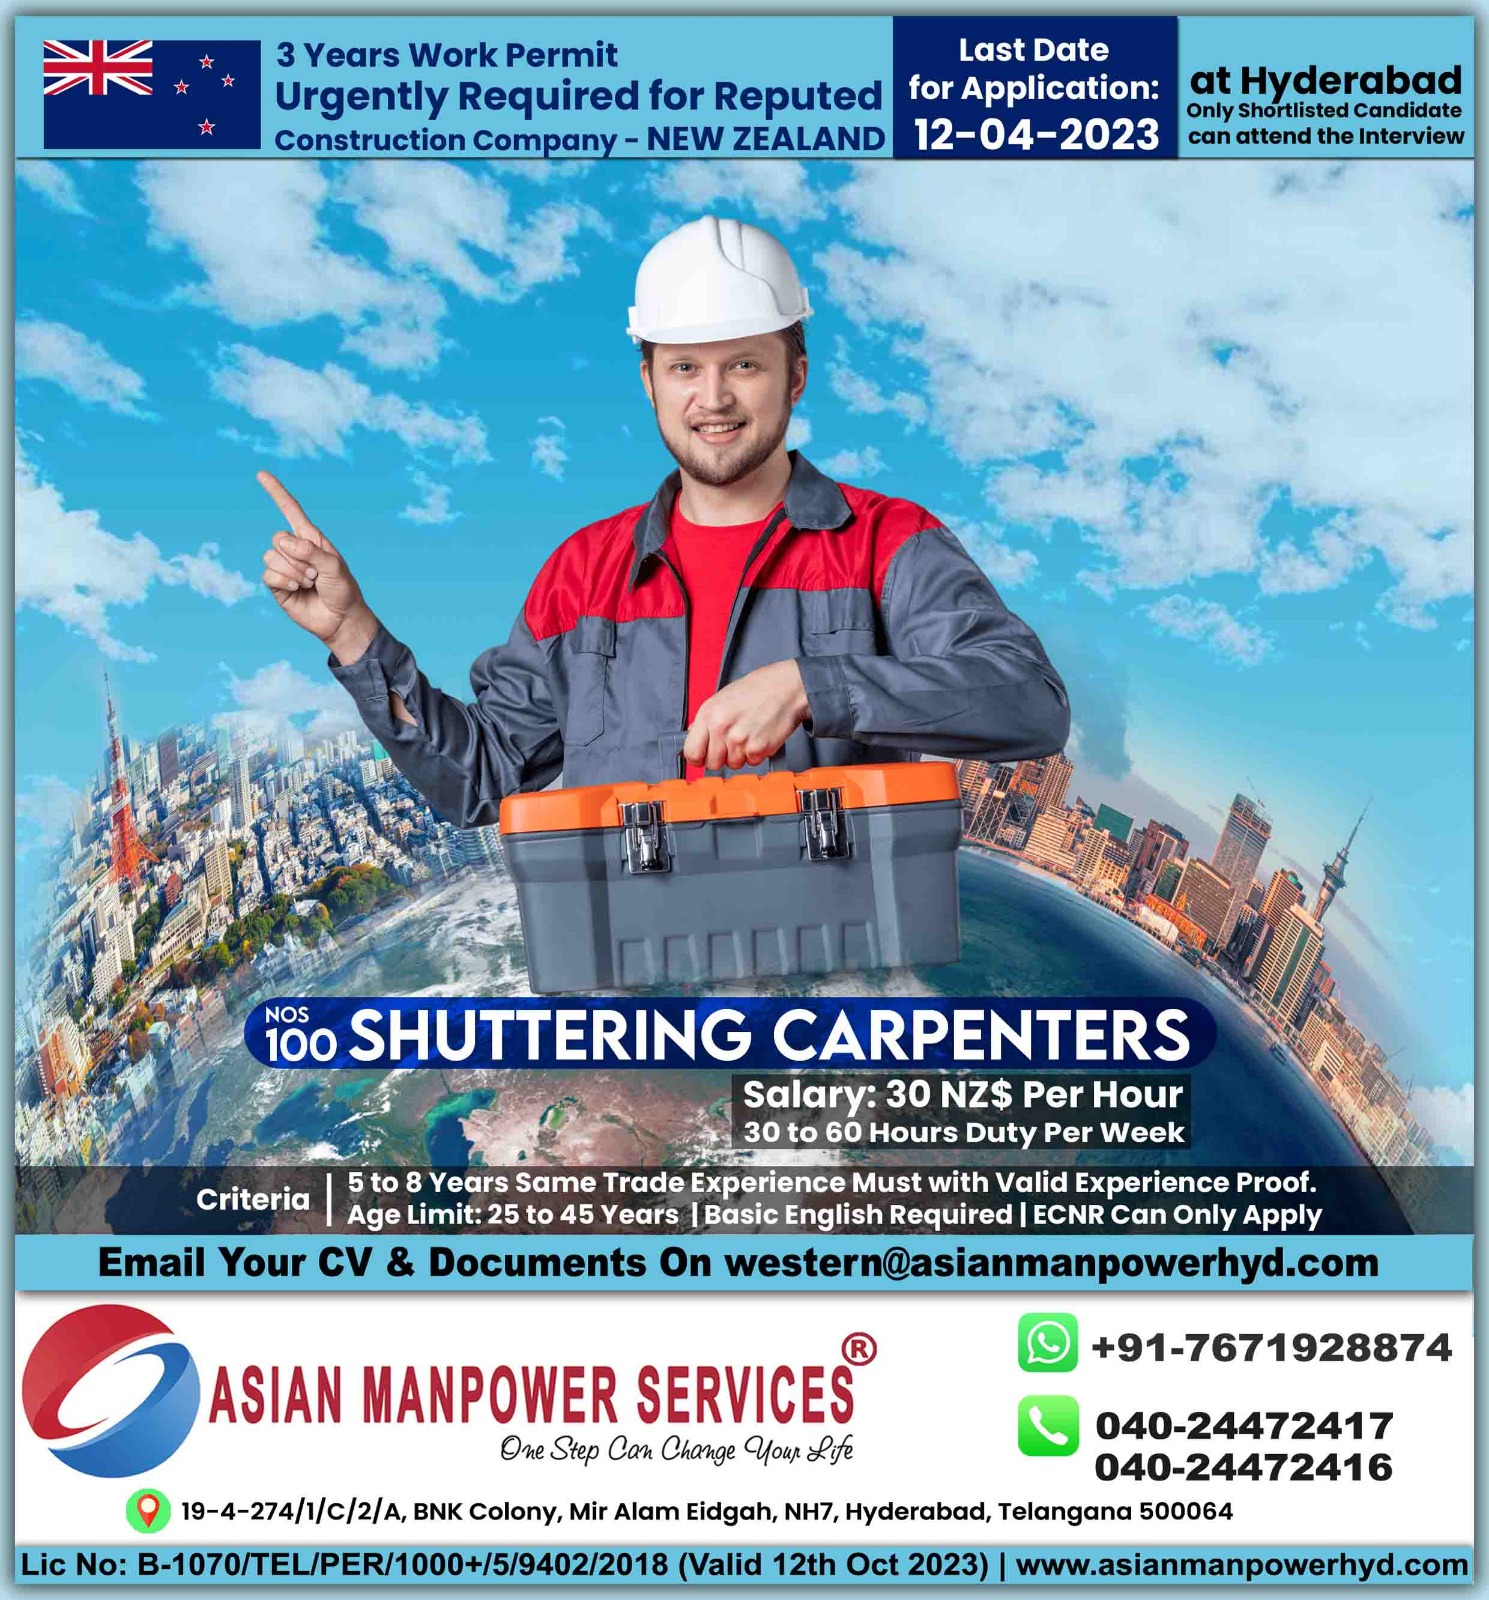 New Zealand Work Permit Visa – Shuttering Carpenter Required – Last Date for Application 12-04-2023